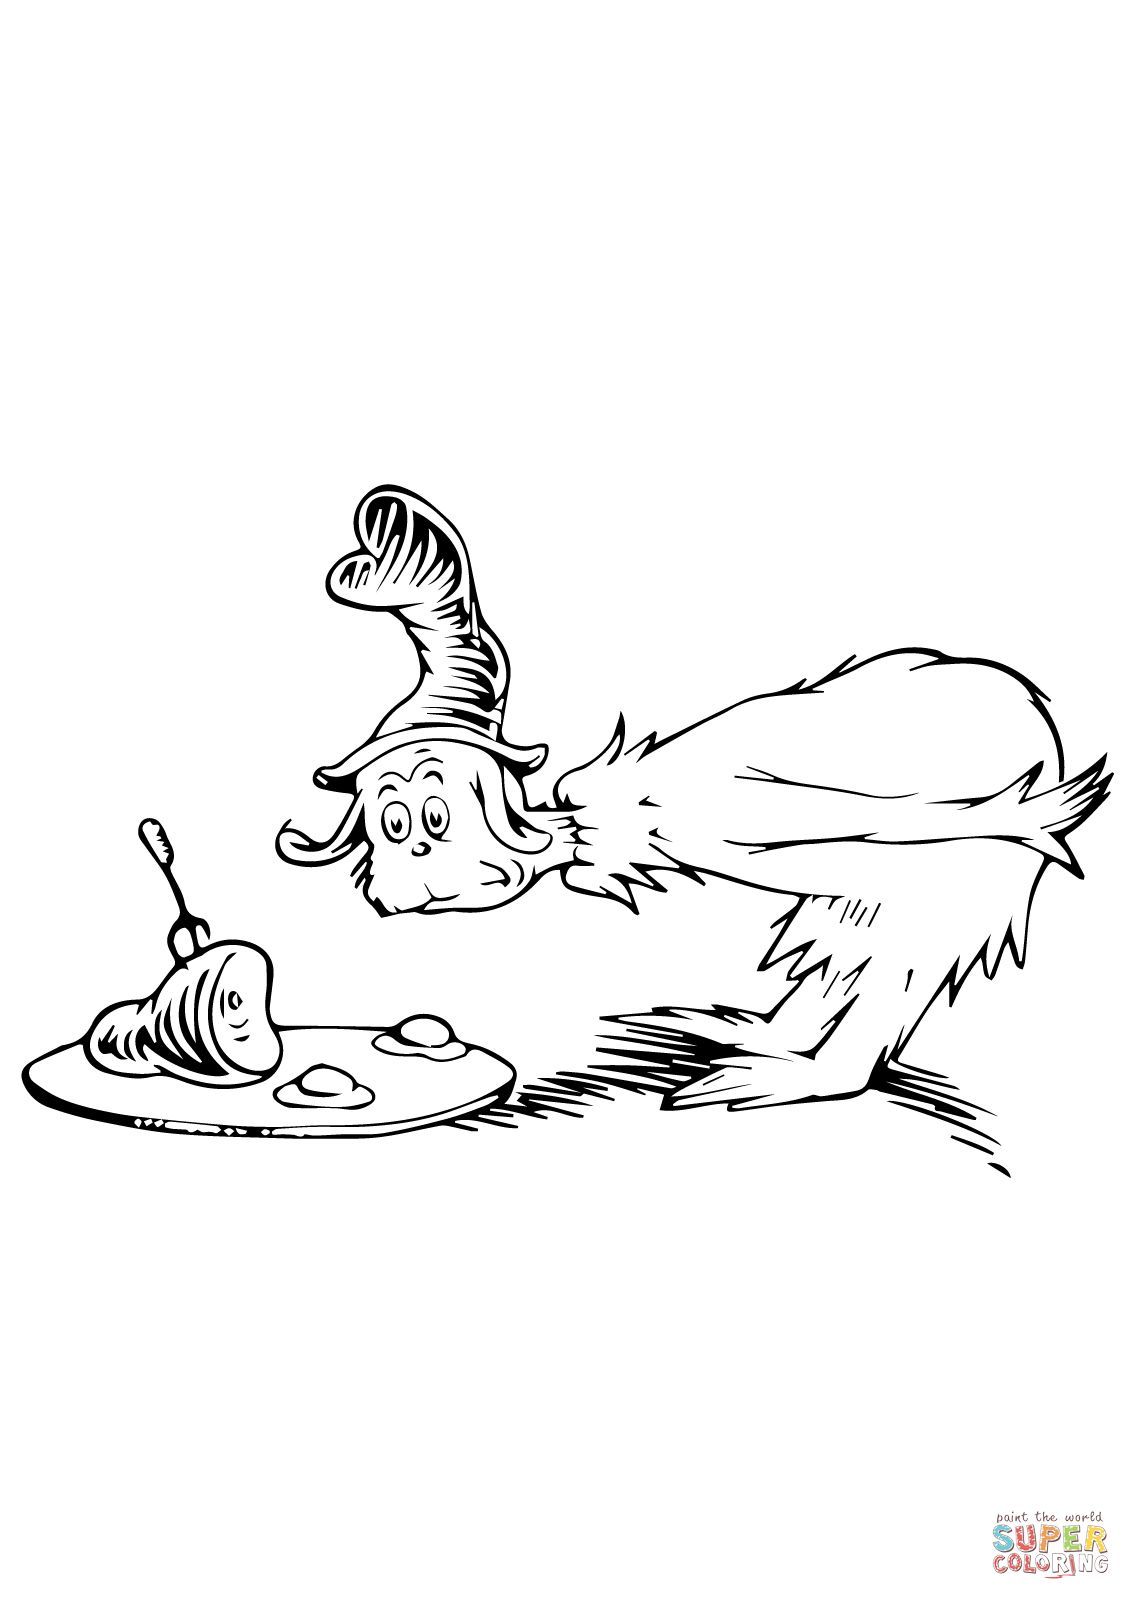 Dr seuss coloring pages green eggs and ham dr seuss coloring sheet